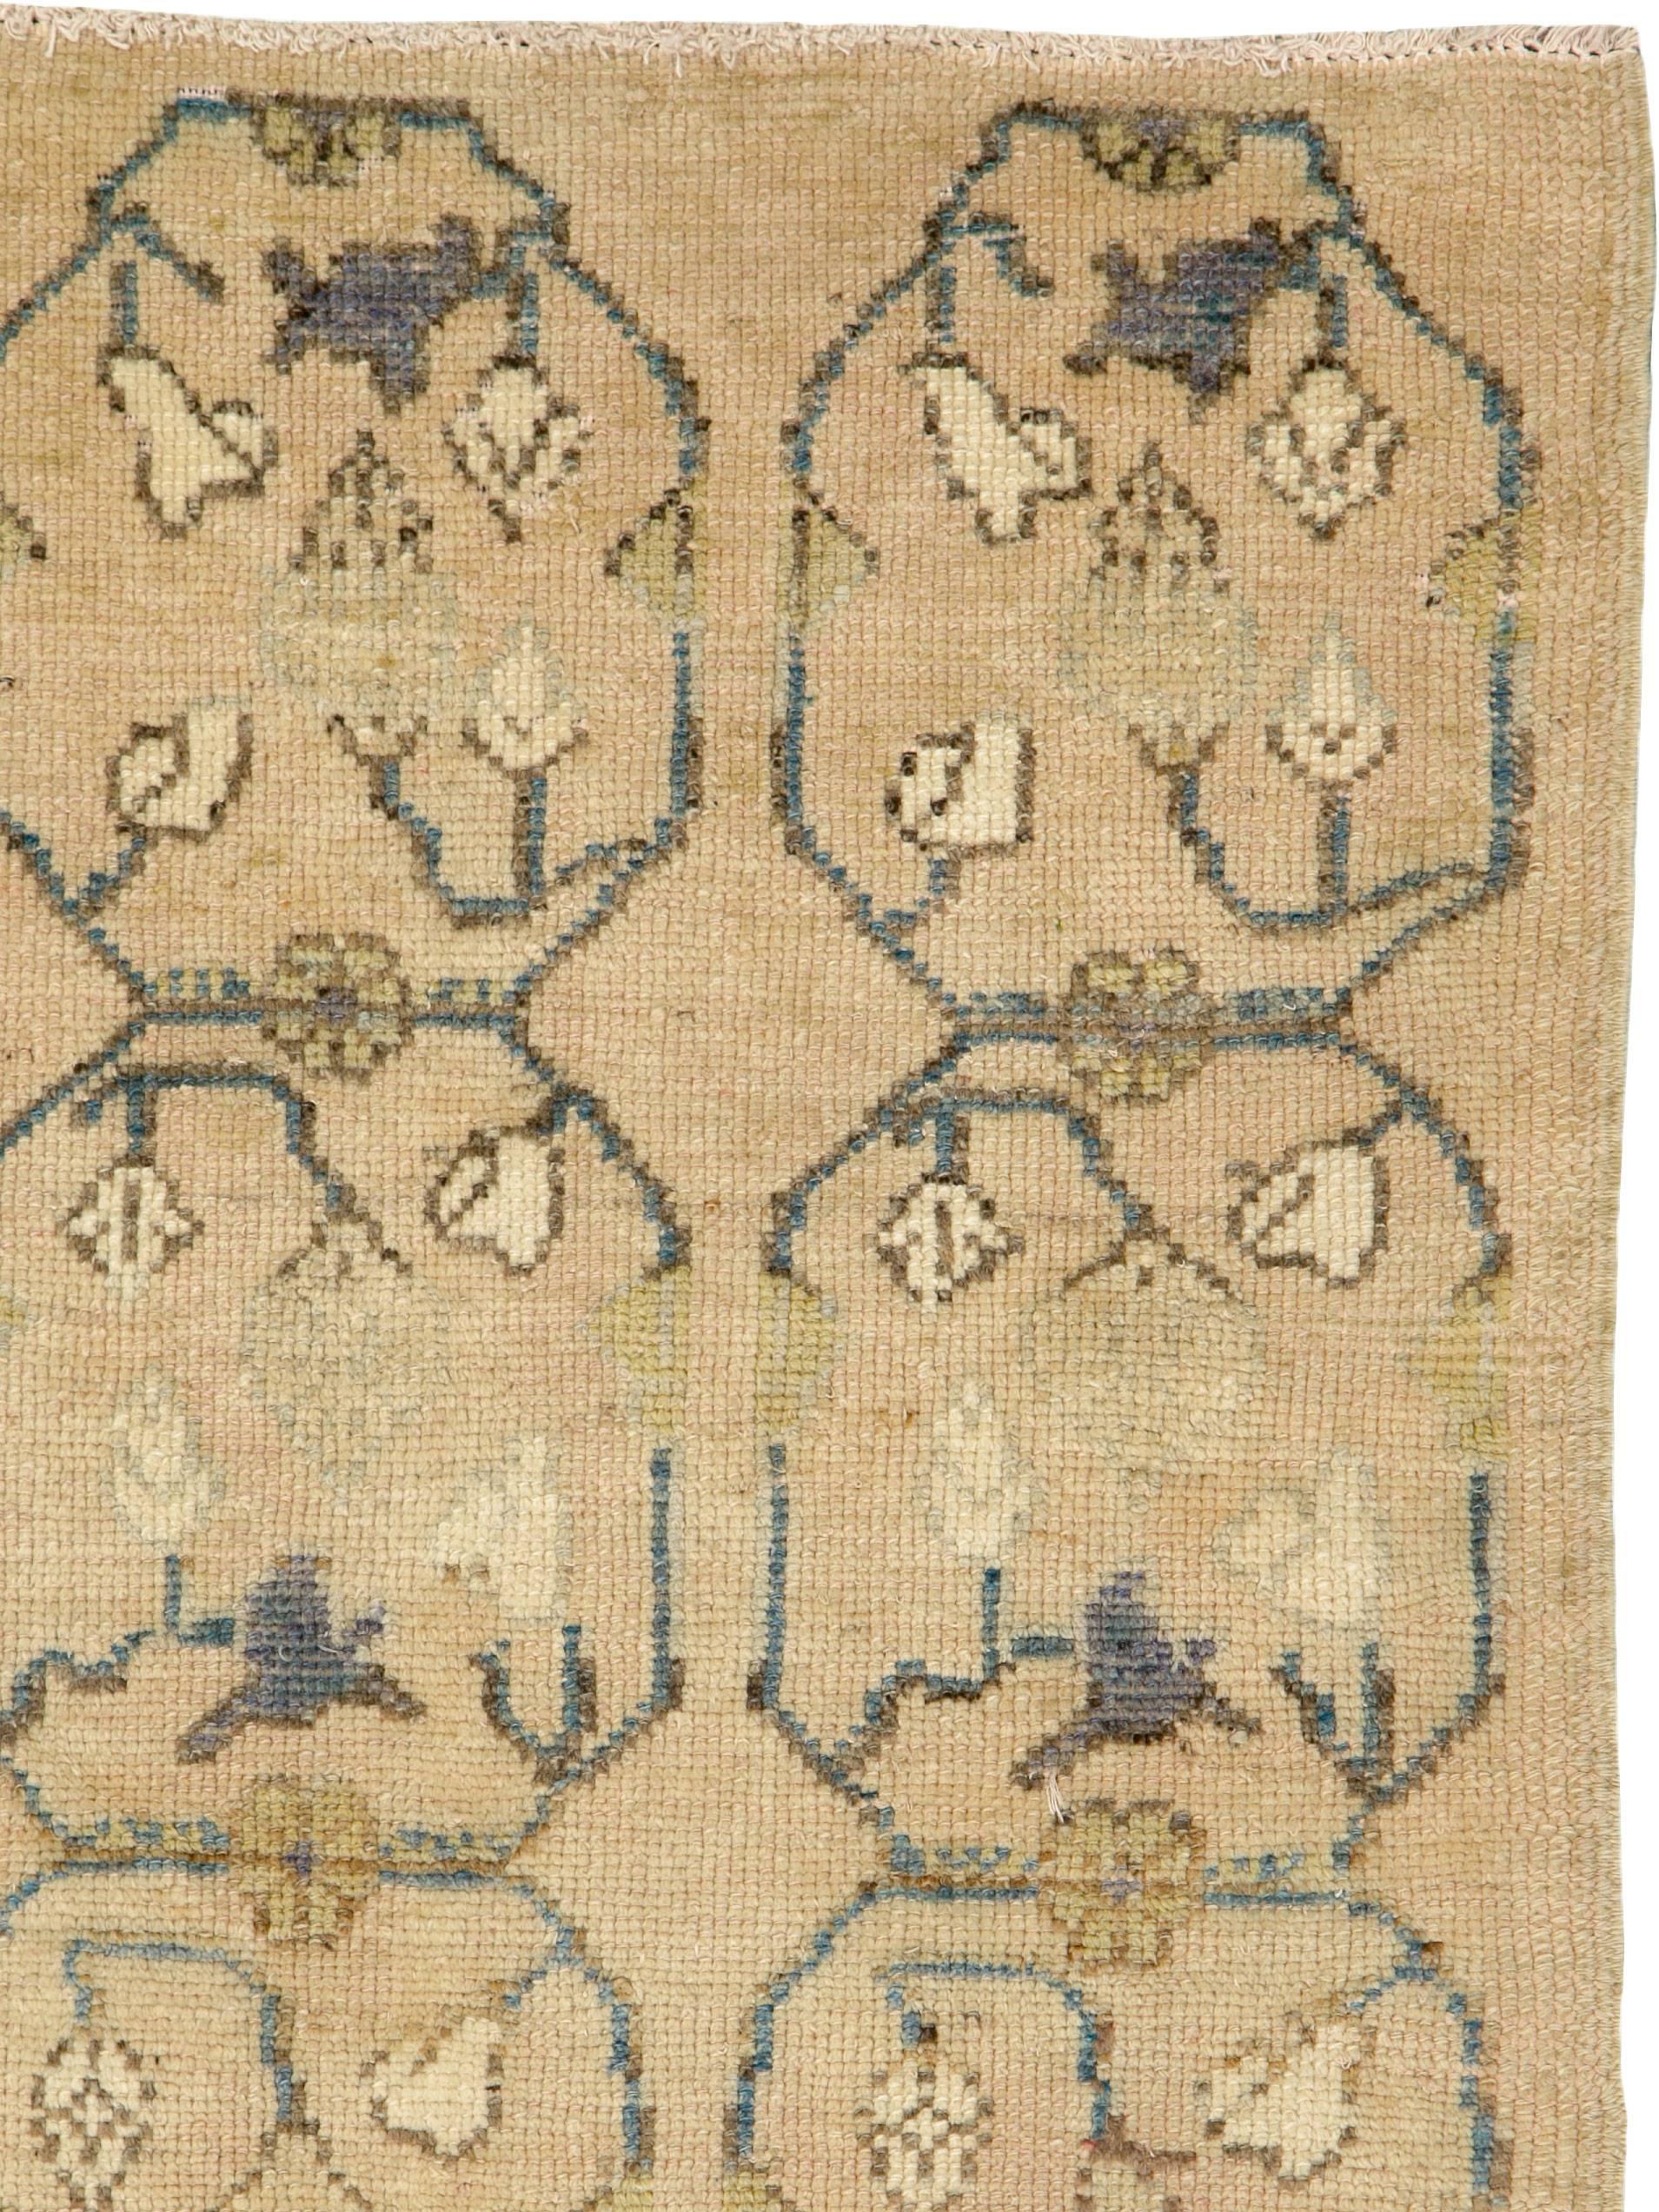 A vintage Turkish Anatolian rug from the second half of the 20th century.

Measures: 2' 11